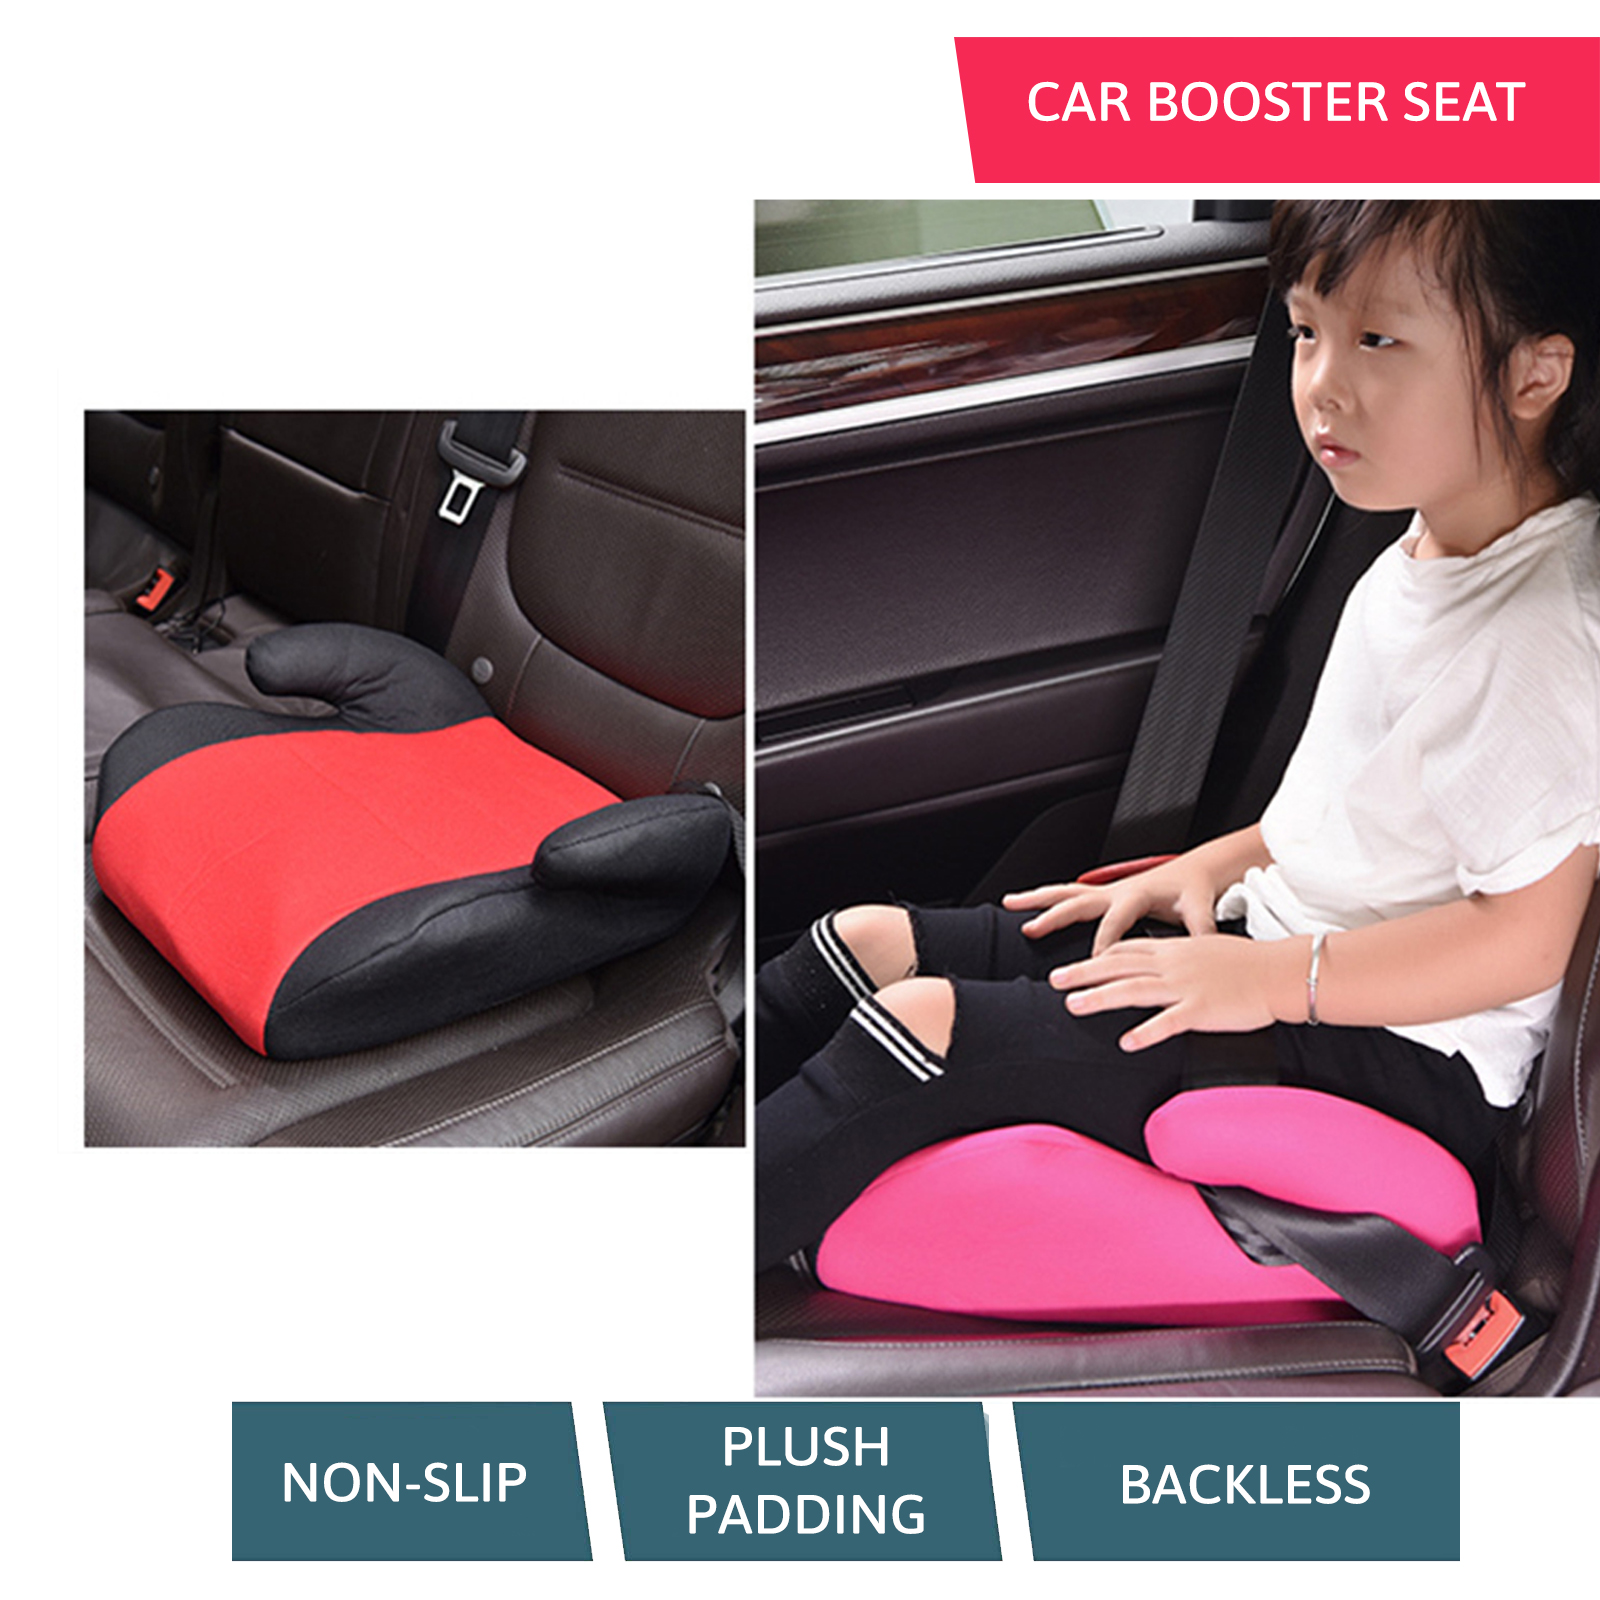 Safe O Kid Travel Kit/ Combo, Neck Support Pillow, Backless Car Booster